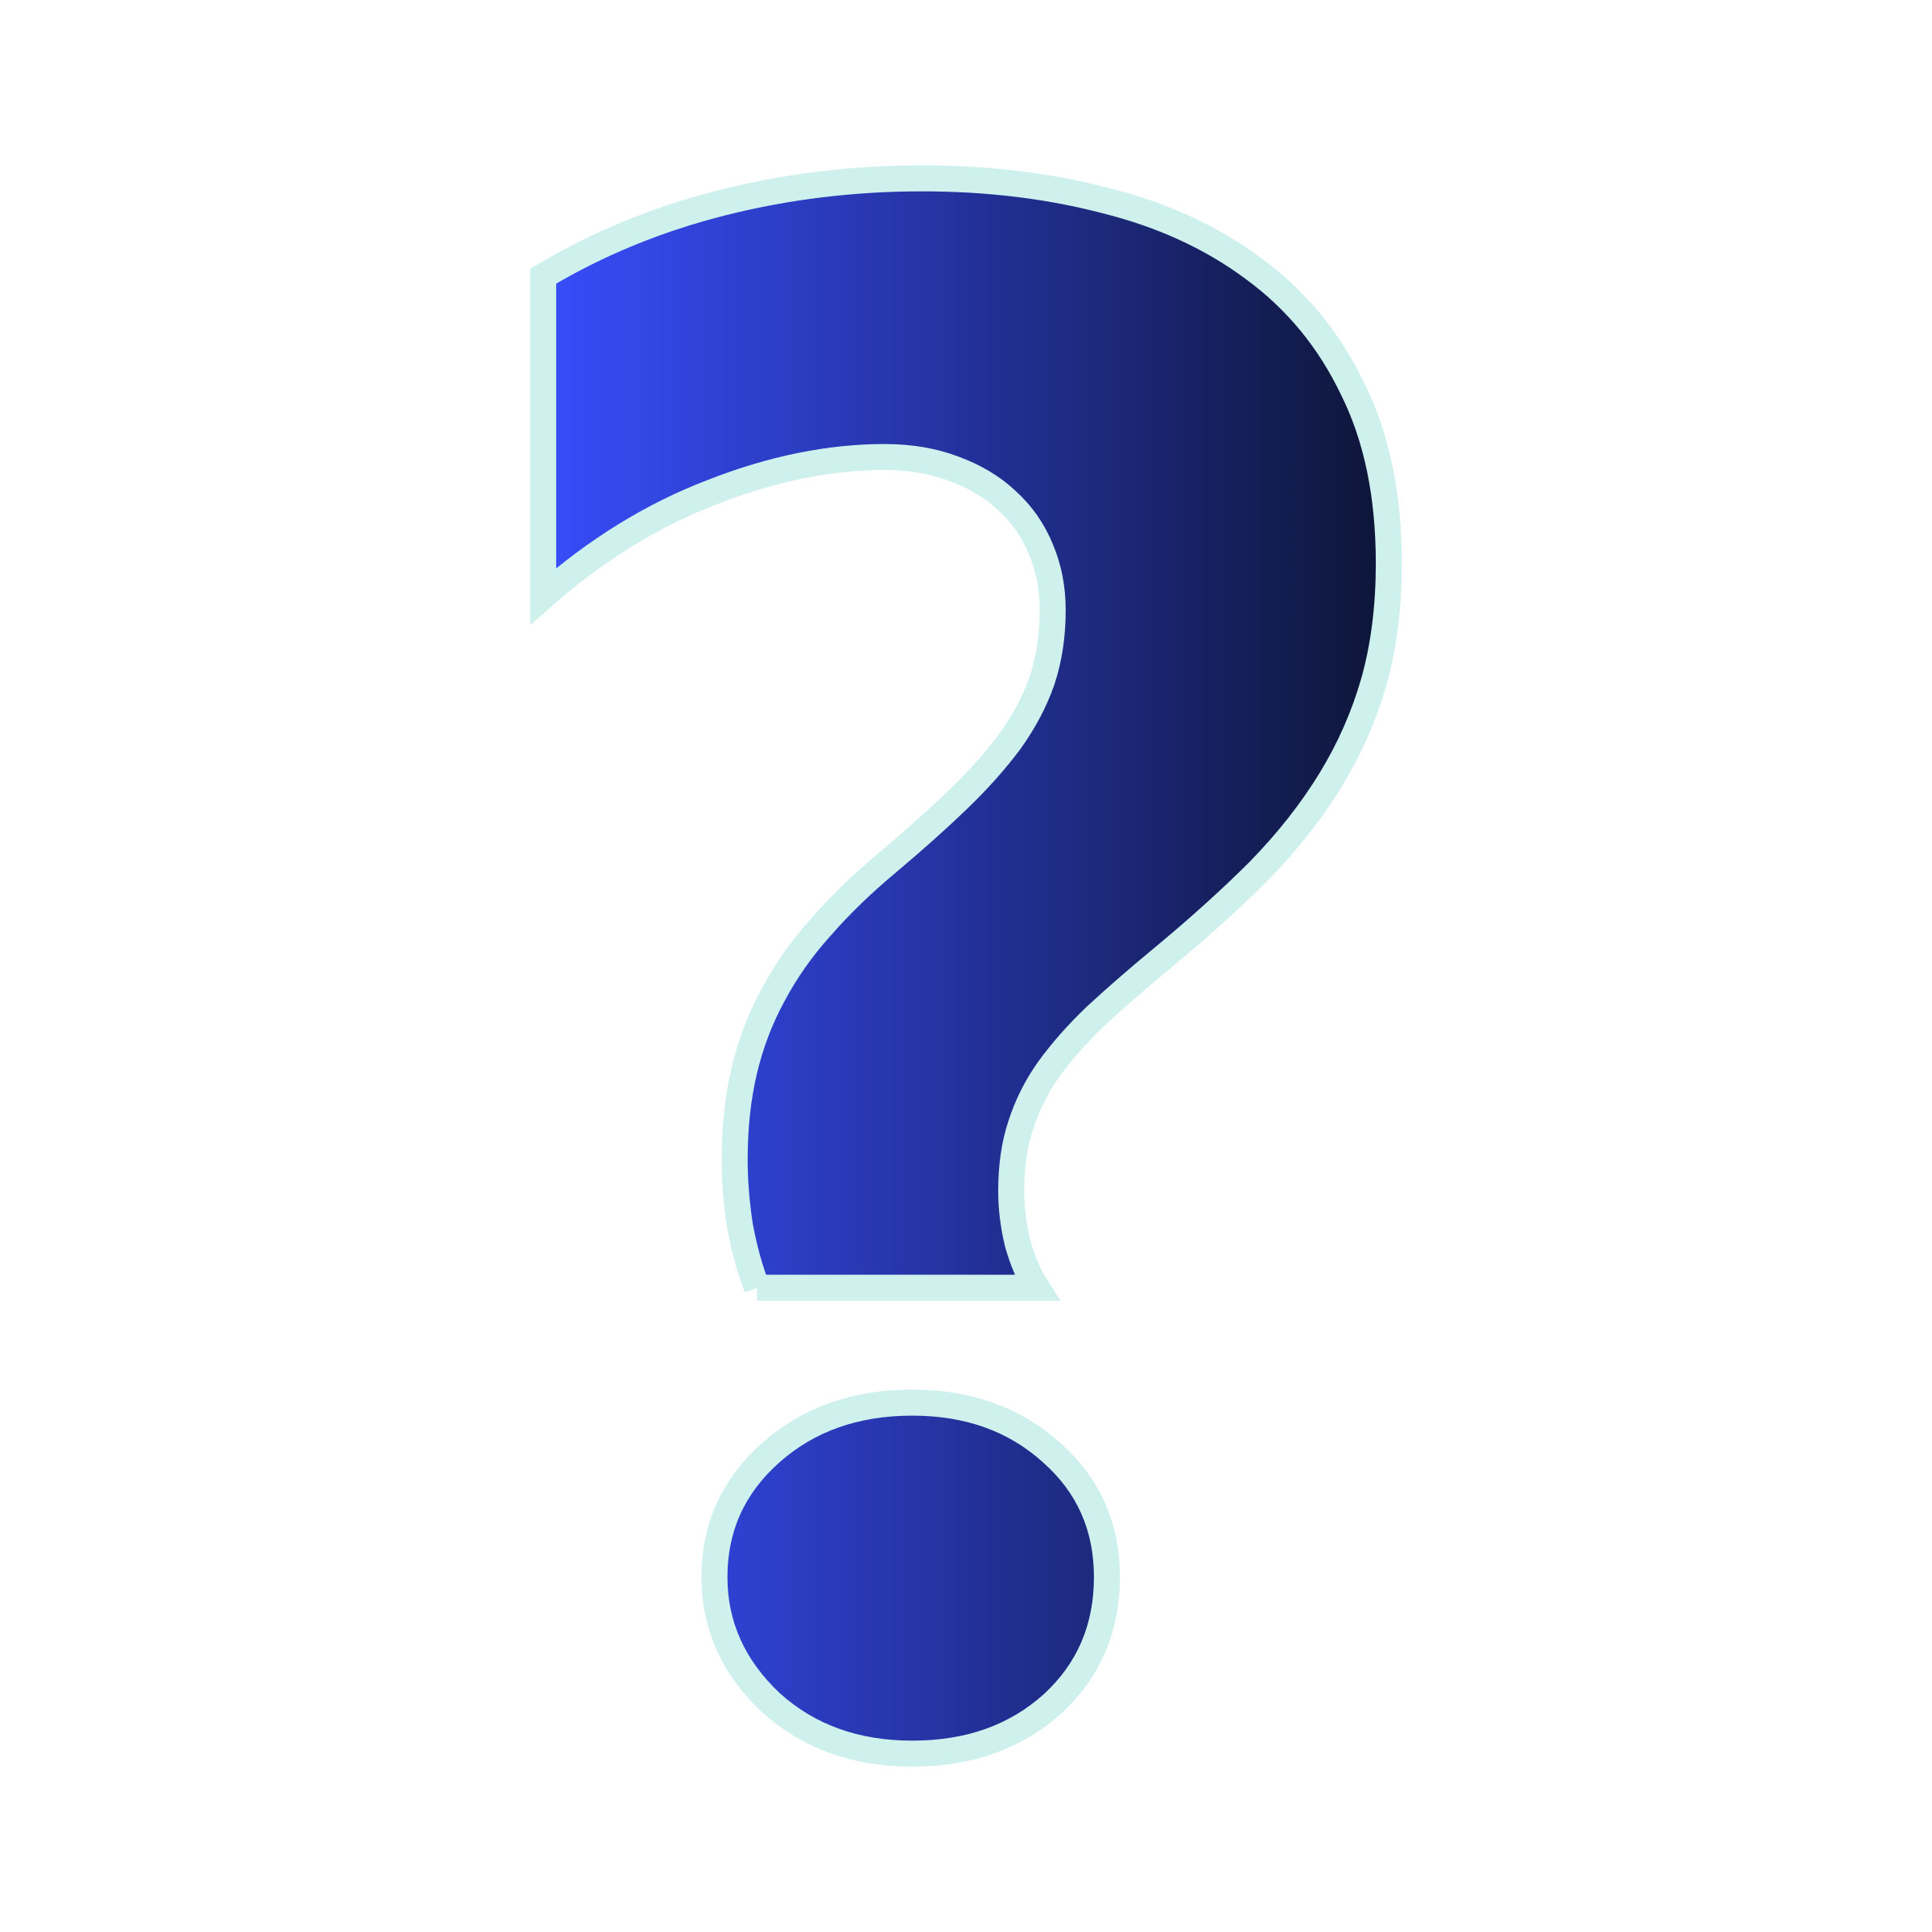 free clip art of question mark - photo #40